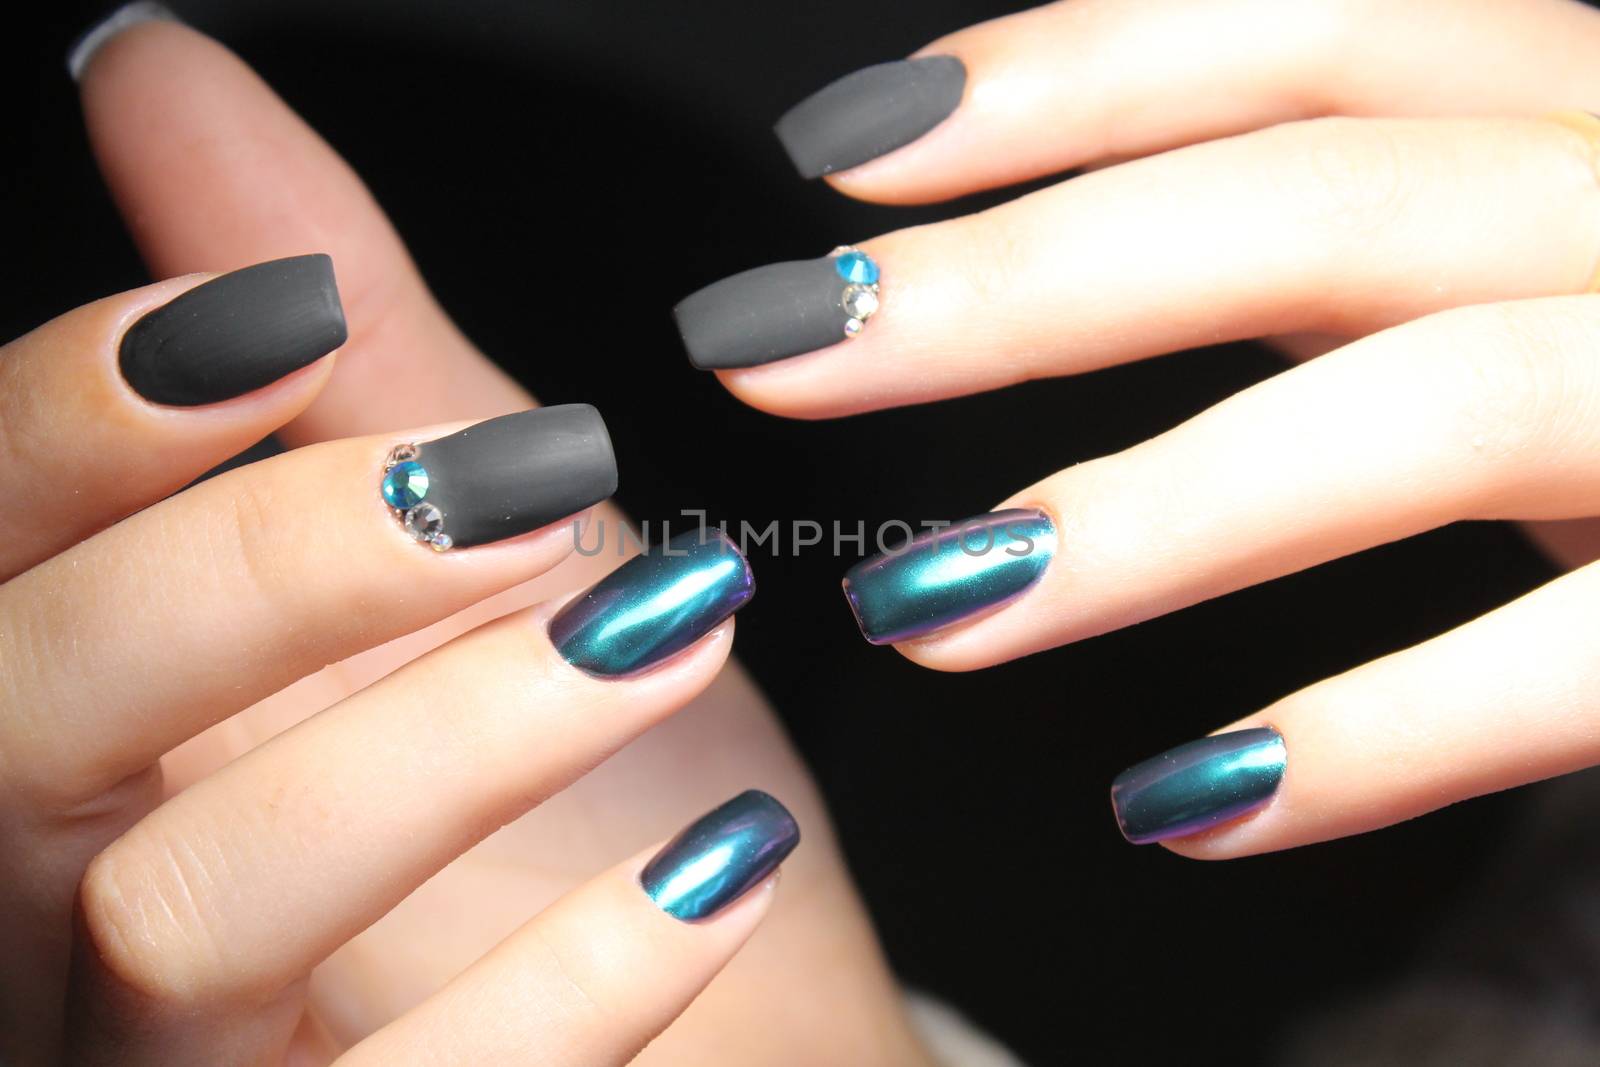 Sexual nail design by SmirMaxStock